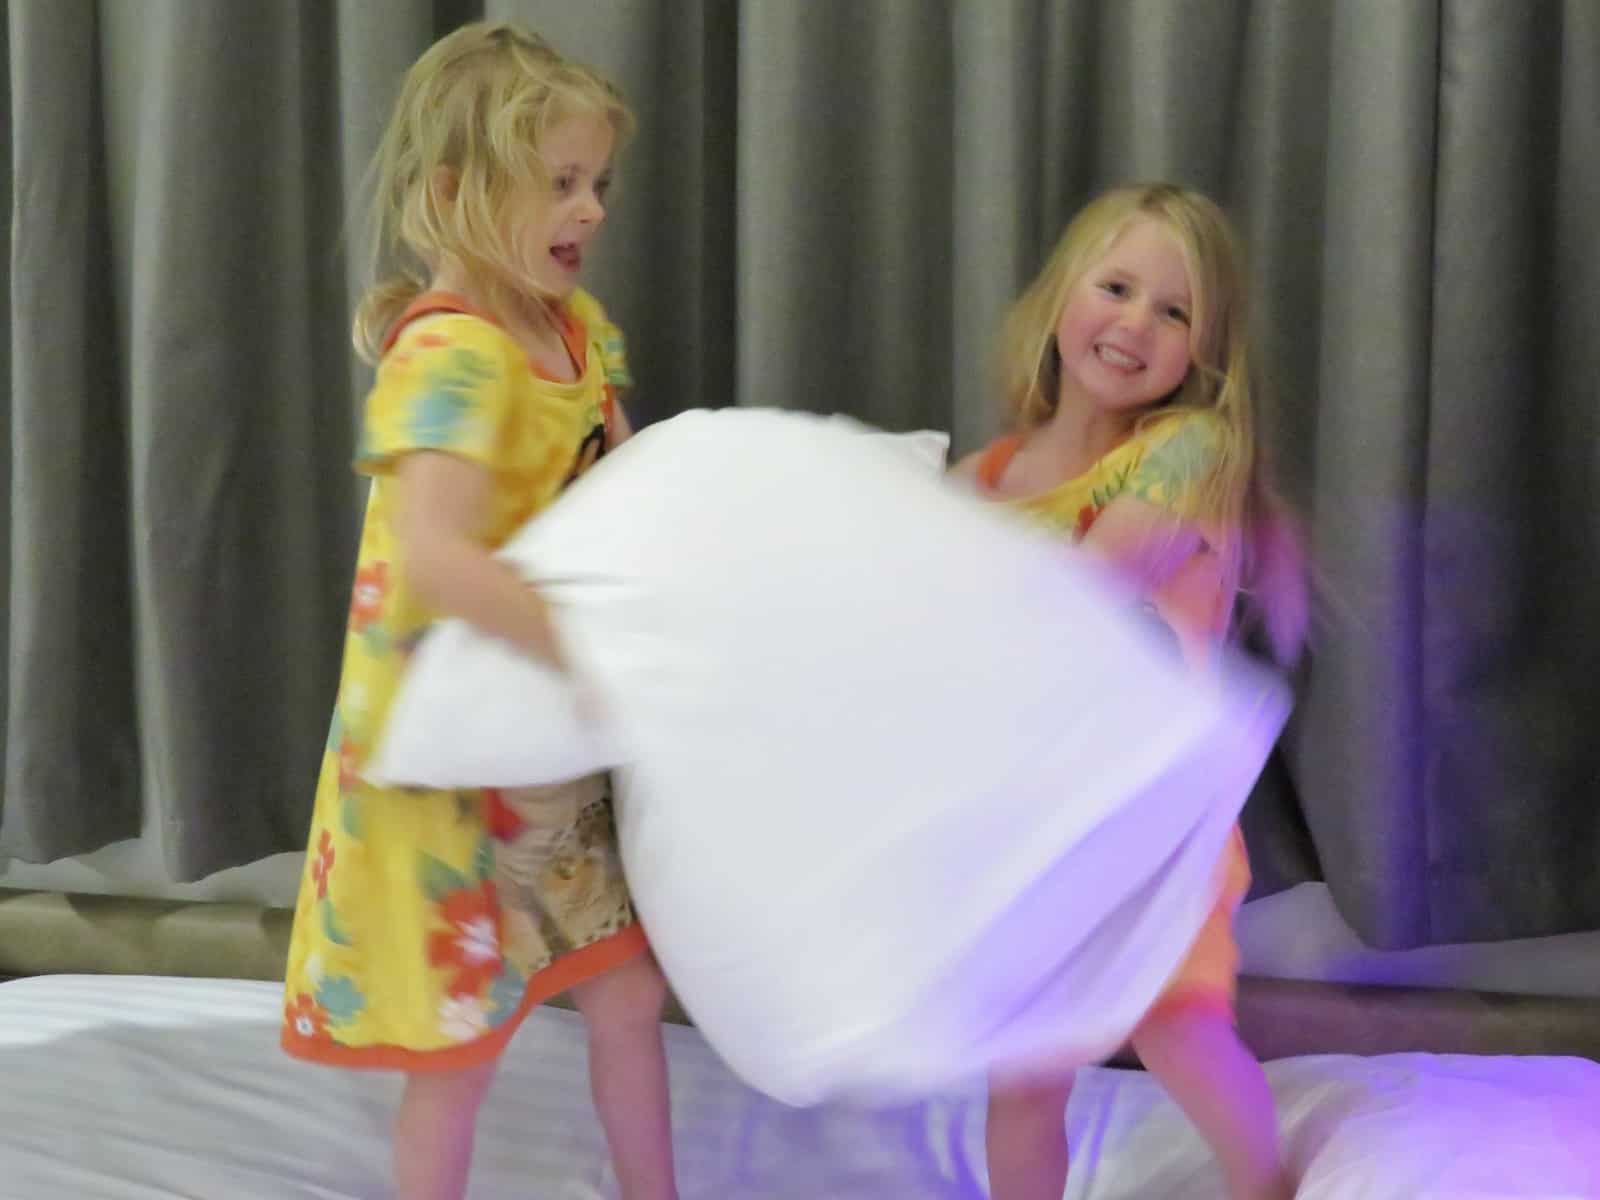 Roomzzz Manchester Corn Exchange pillow fight